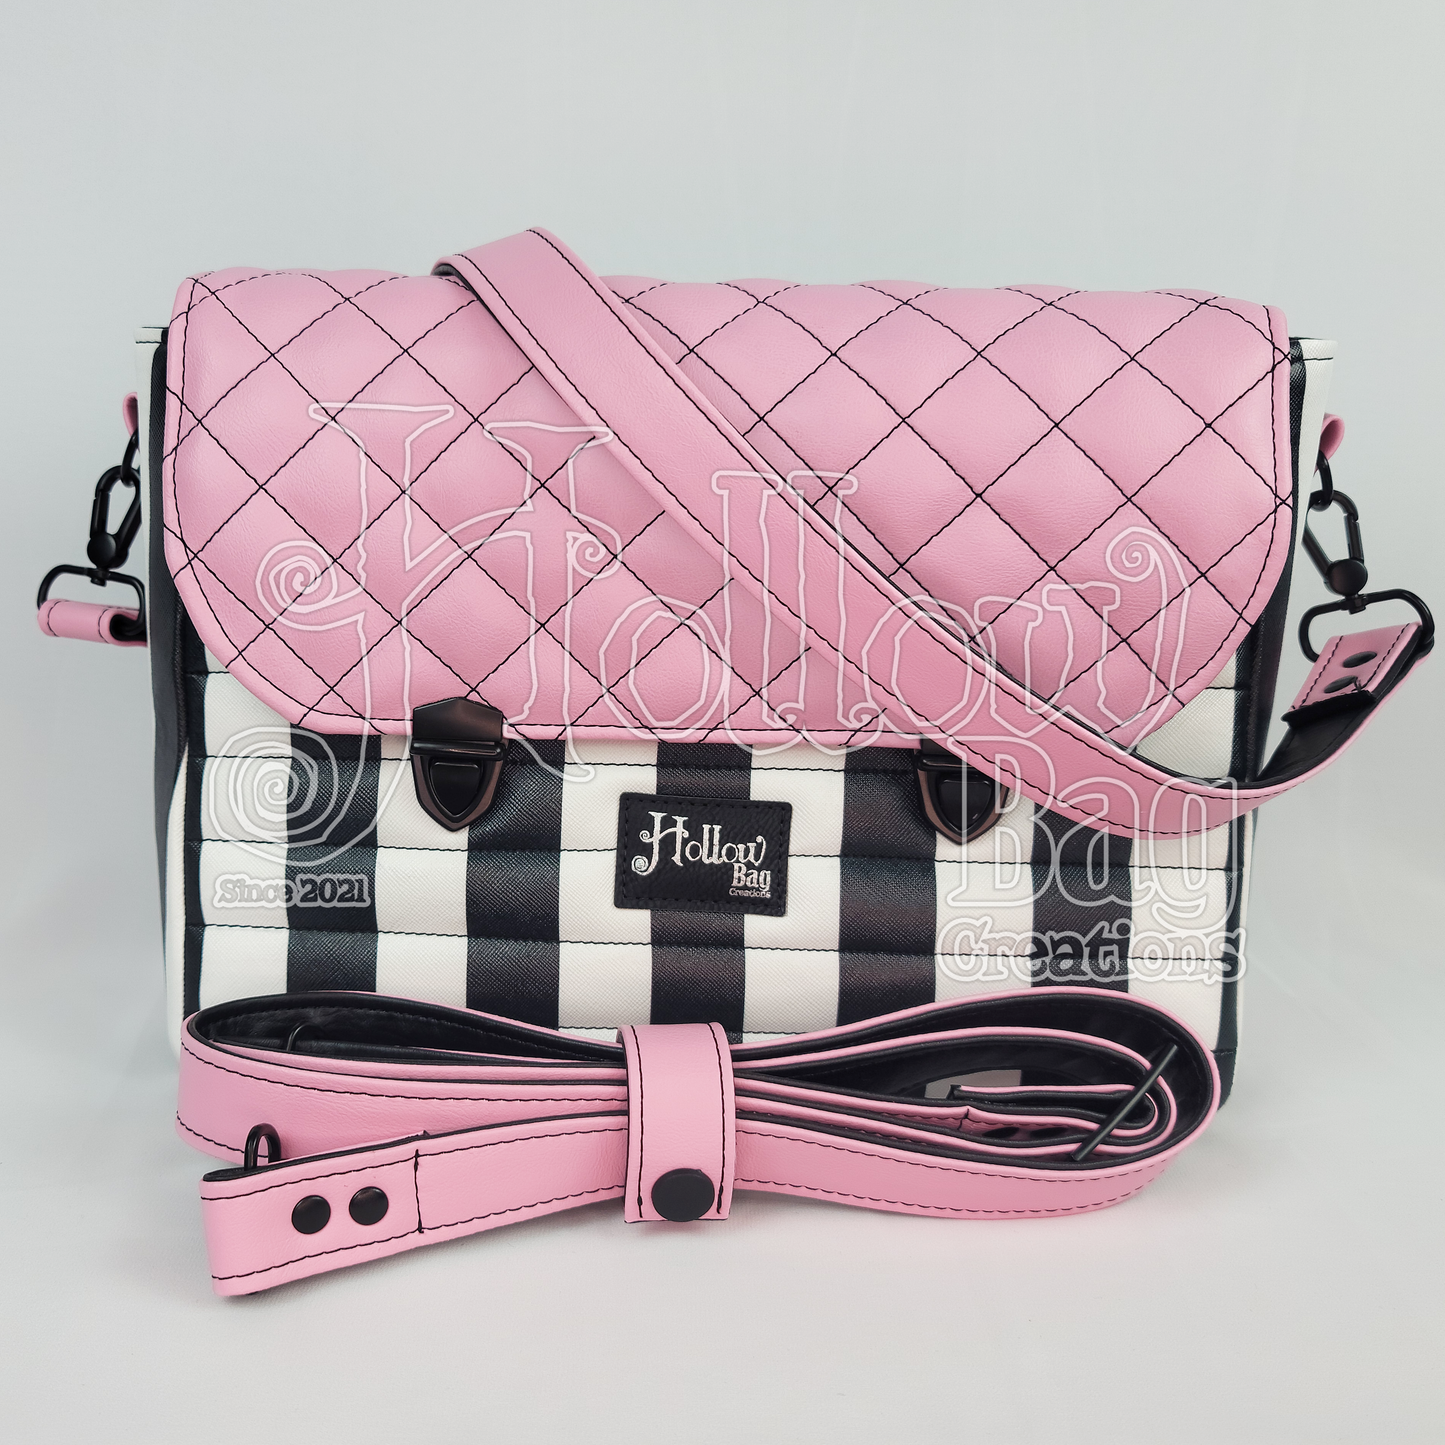 The Narcissist - Pink, but striped!